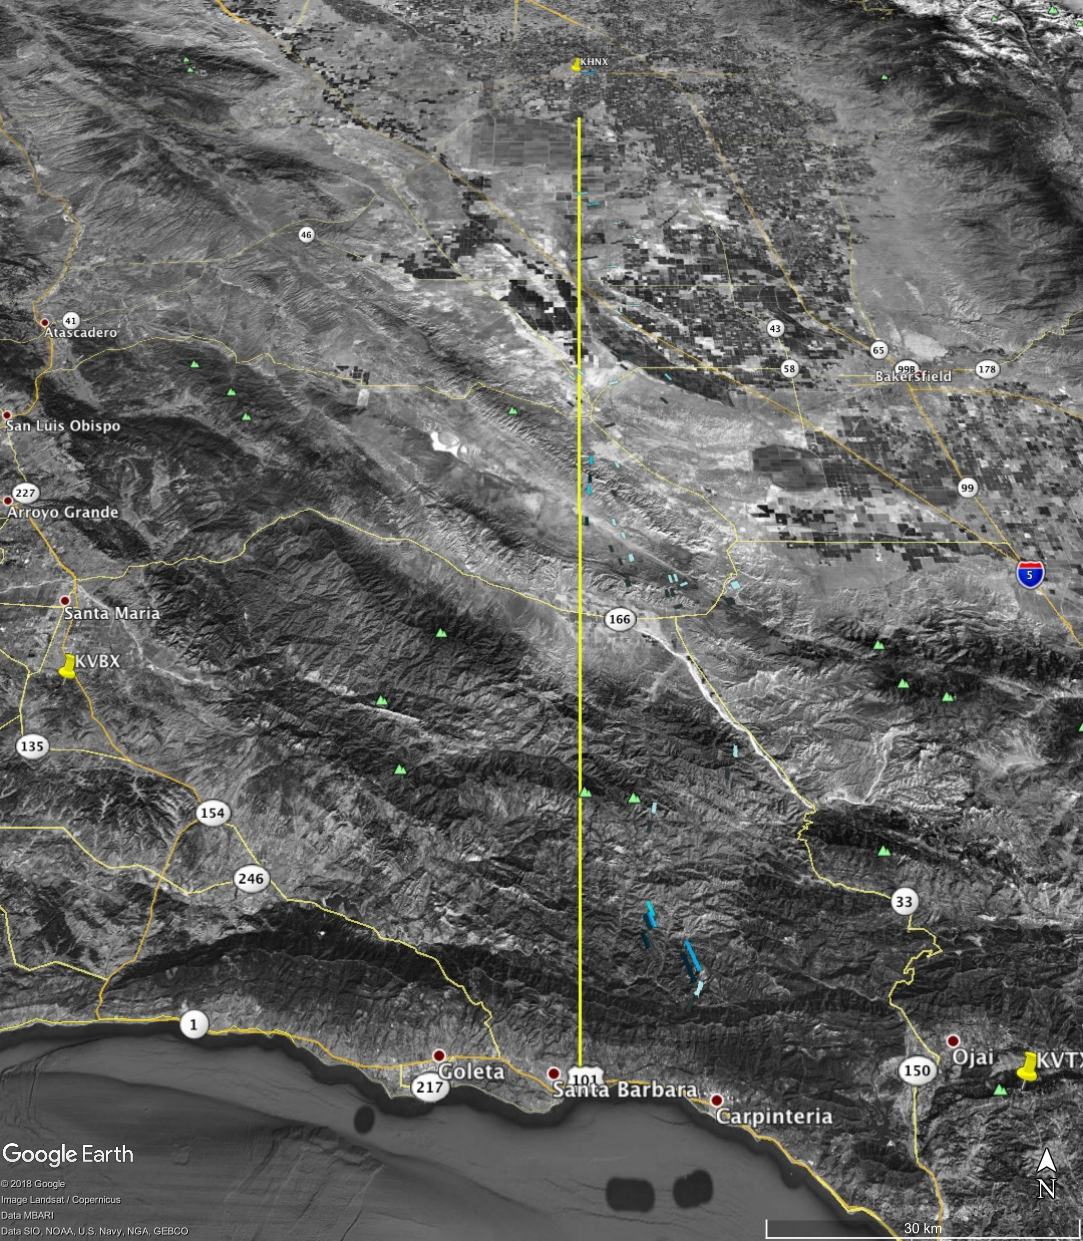 This composite image shows all the radar signatures from falling debris as blue/gray polygons. The approximate ground track is a yellow line. The large scale makes the radar signatures appear small.